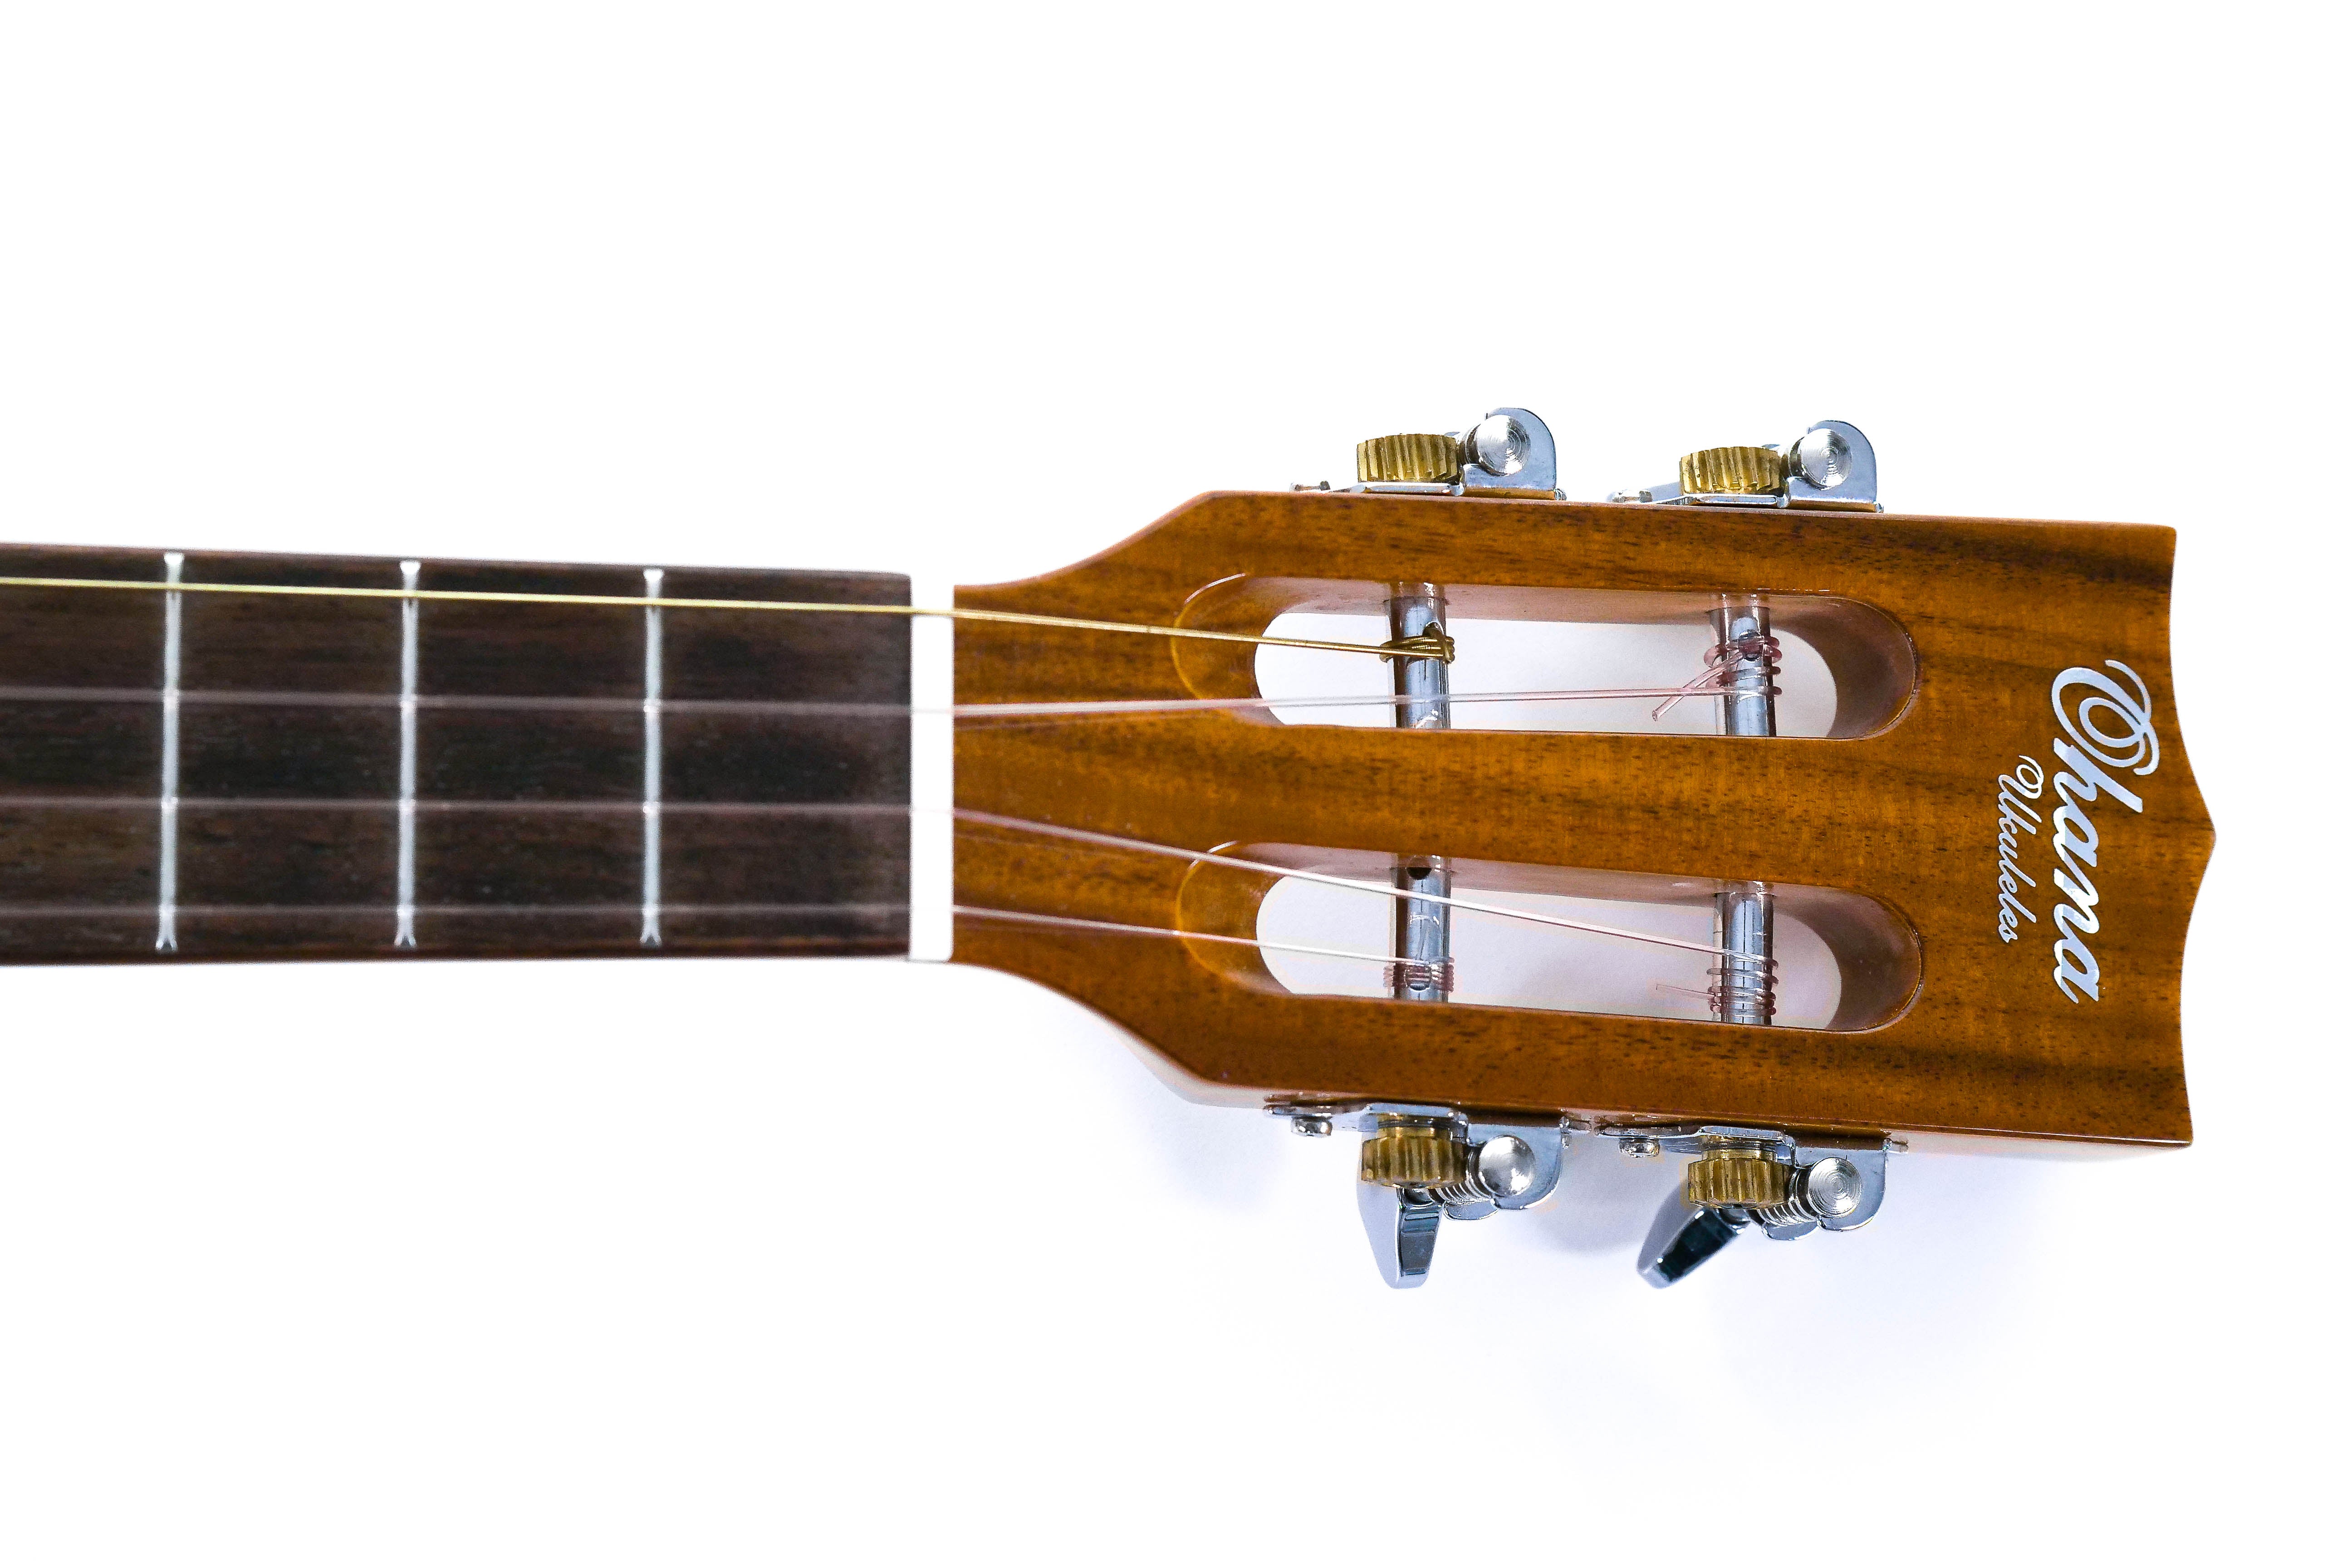 [PRE-OWNED] Ohana TK-250GCE Limited Edition Tenor Ukulele Solid Spruce Top/Acacia with EQ "MARCI"